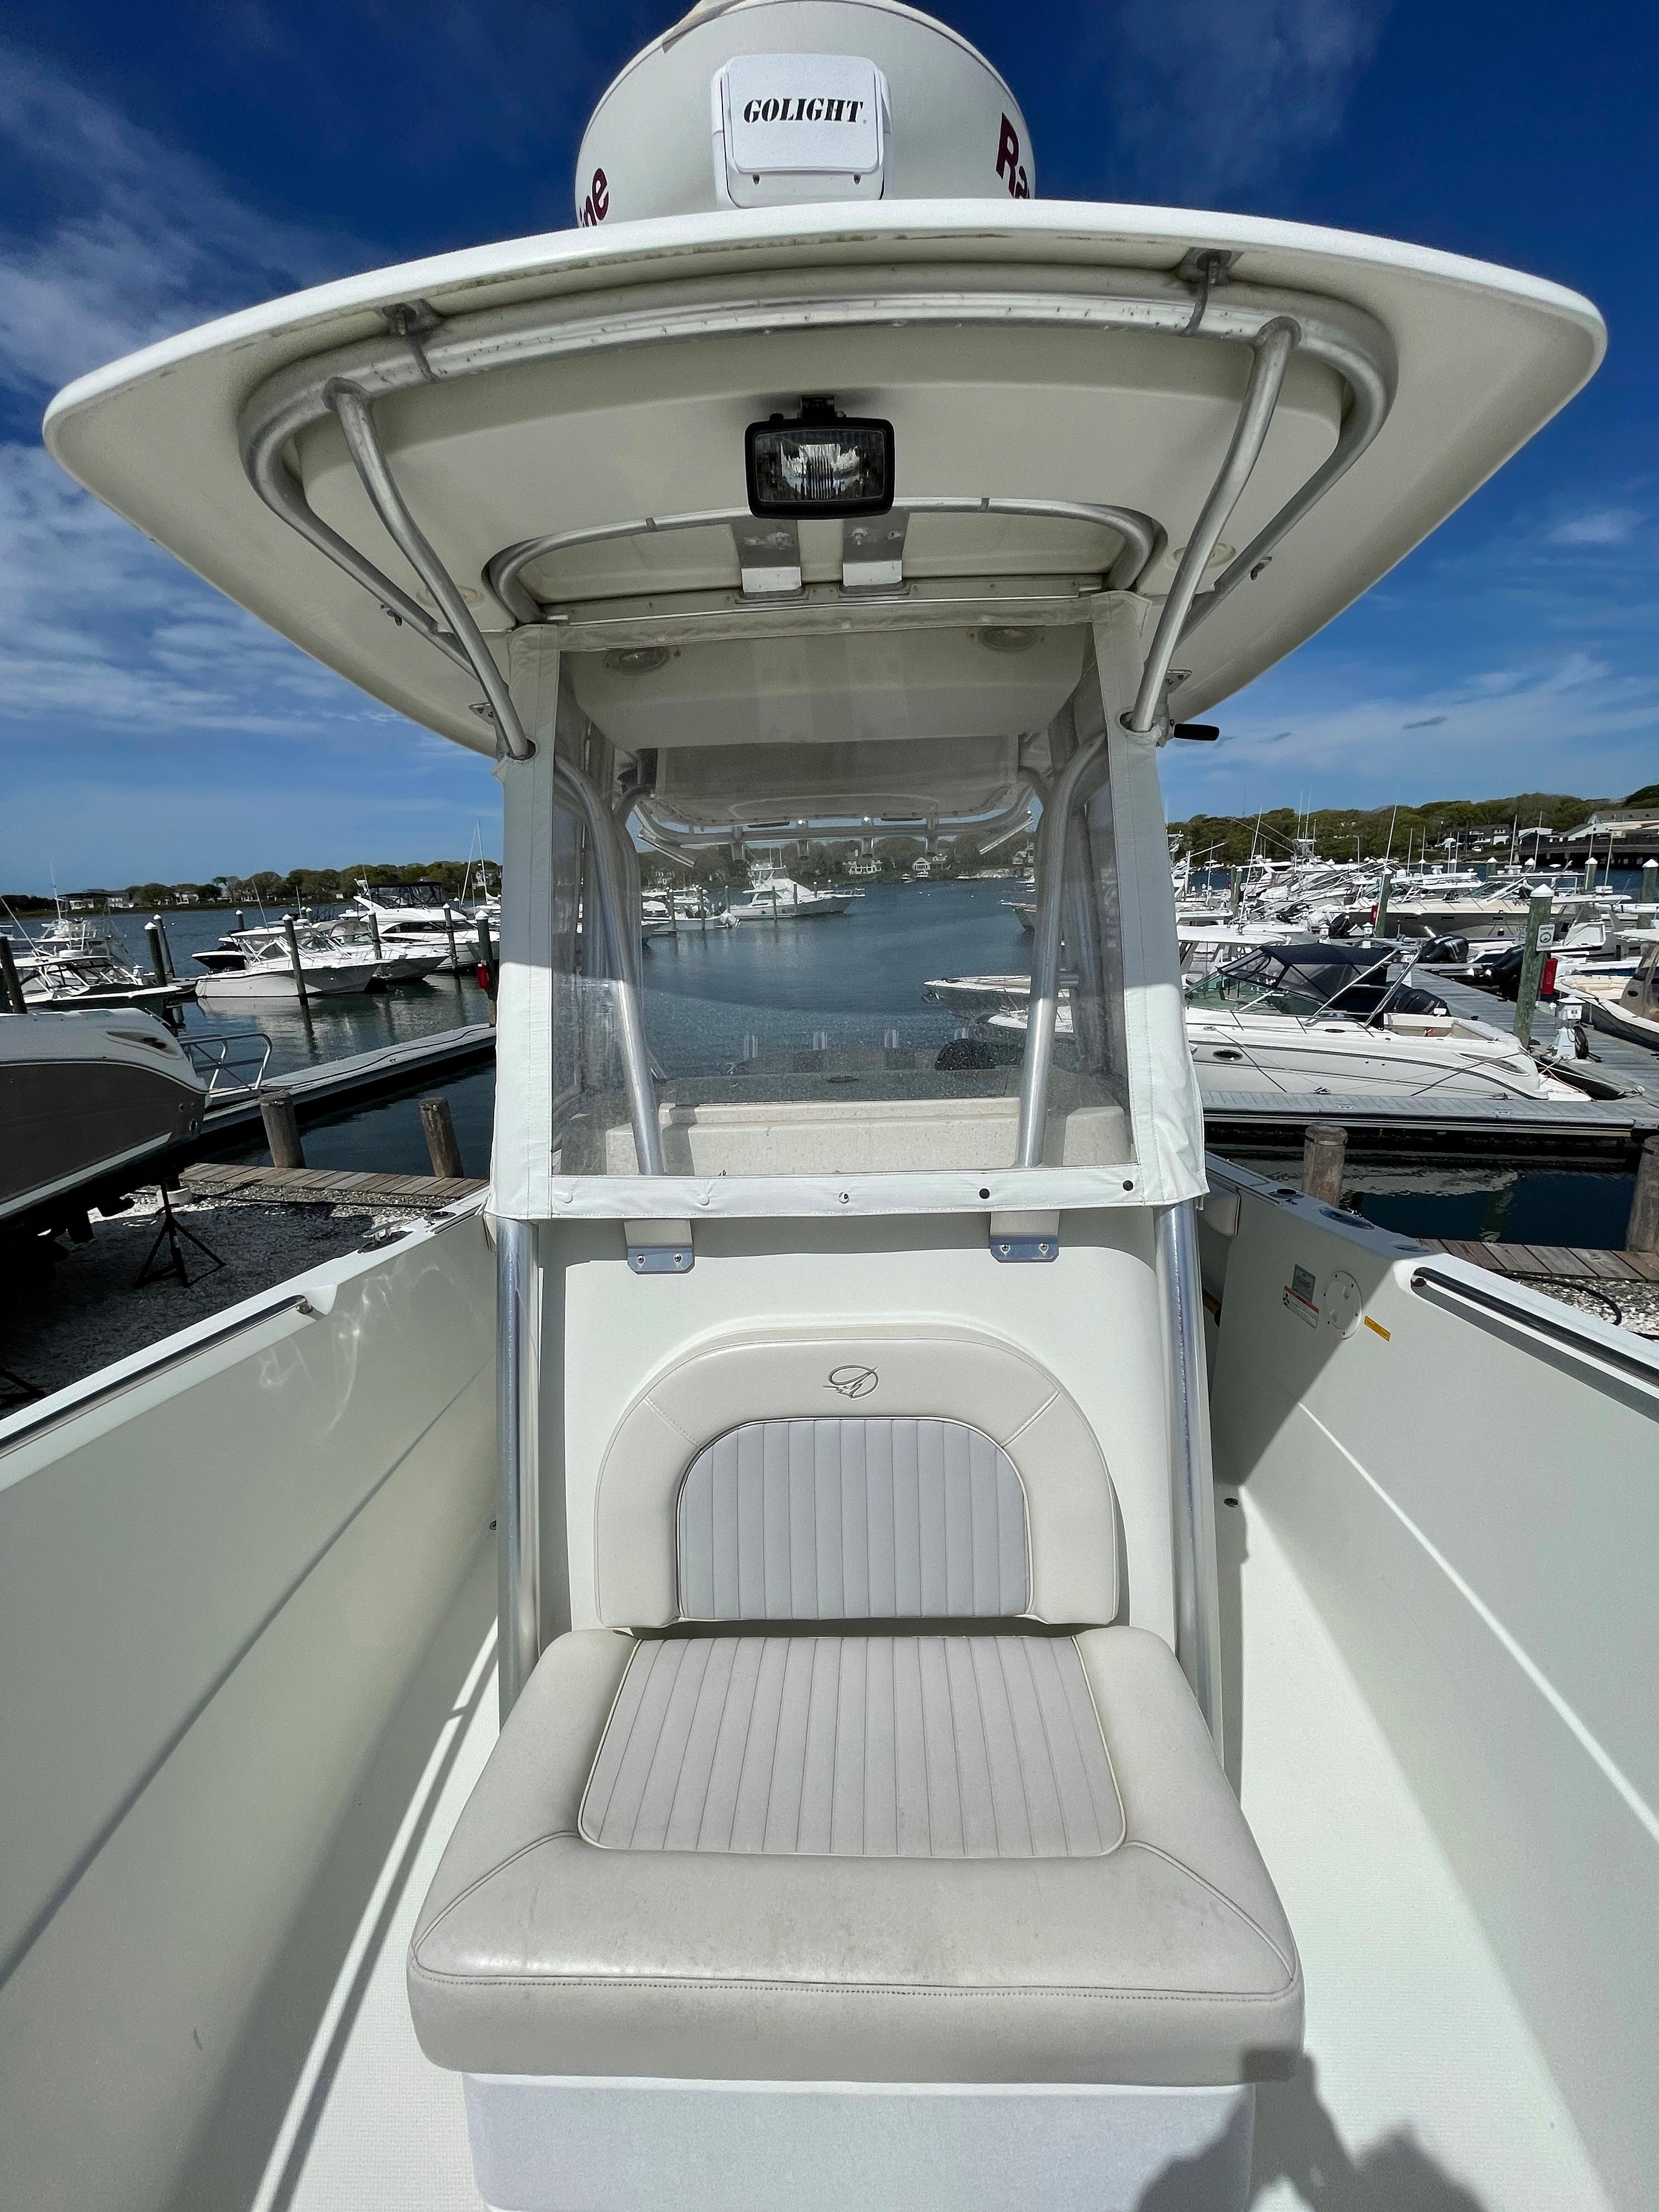 26 ft Sailfish 2660 Center Console Forward Seating with Go Light